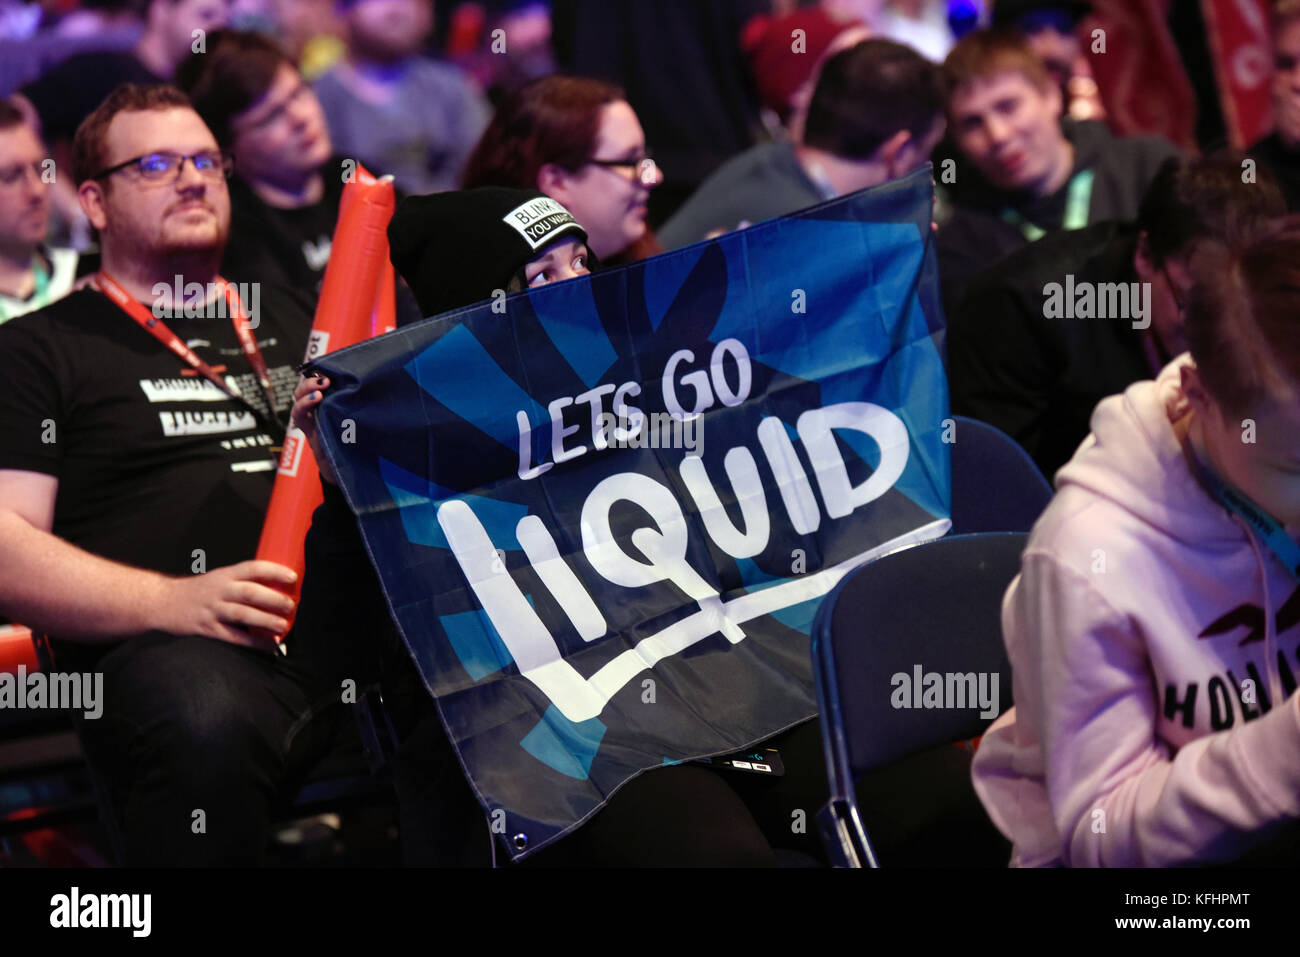 A female fan of the 'Team Liquid' supports her team during the semi-final game at the ESL One e-sport event in the Barclaycard Arena in Hamburg, Germany, 29 October 2017. The event is one of the biggest e-sport events in Germany. Contestants are playing the computer game 'Dota 2' for a prize of one million US dollars. Photo: Marek Majewsky/dpa Stock Photo